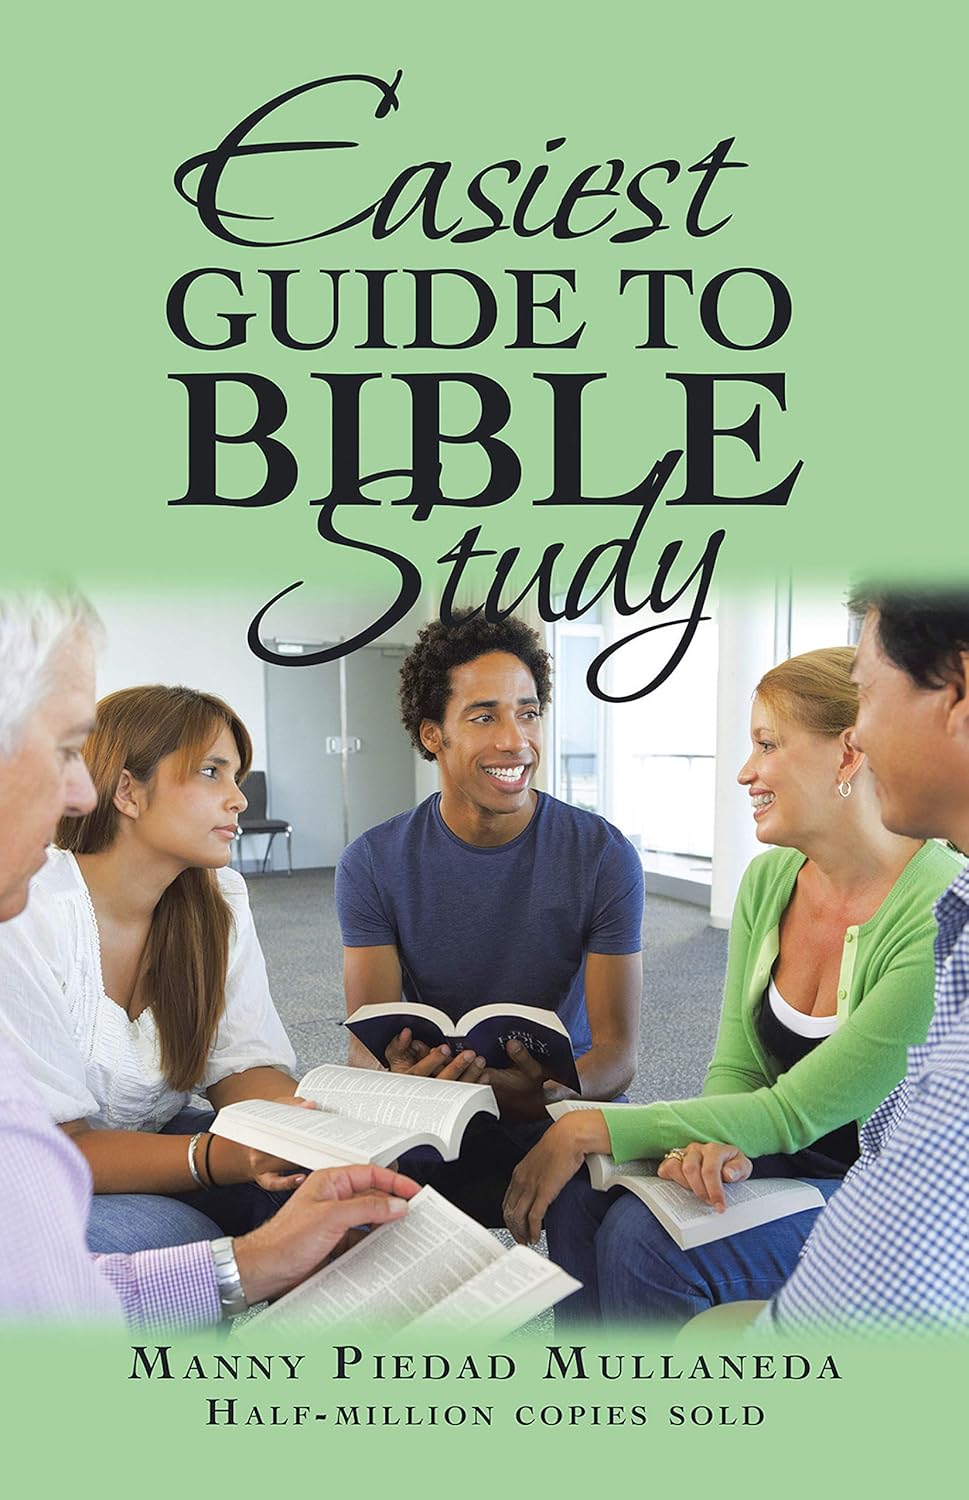 Discover the Profound Wisdom of the Bible with Emmanuel Piedad Mullaneda's "Easiest Guide to Bible Study"